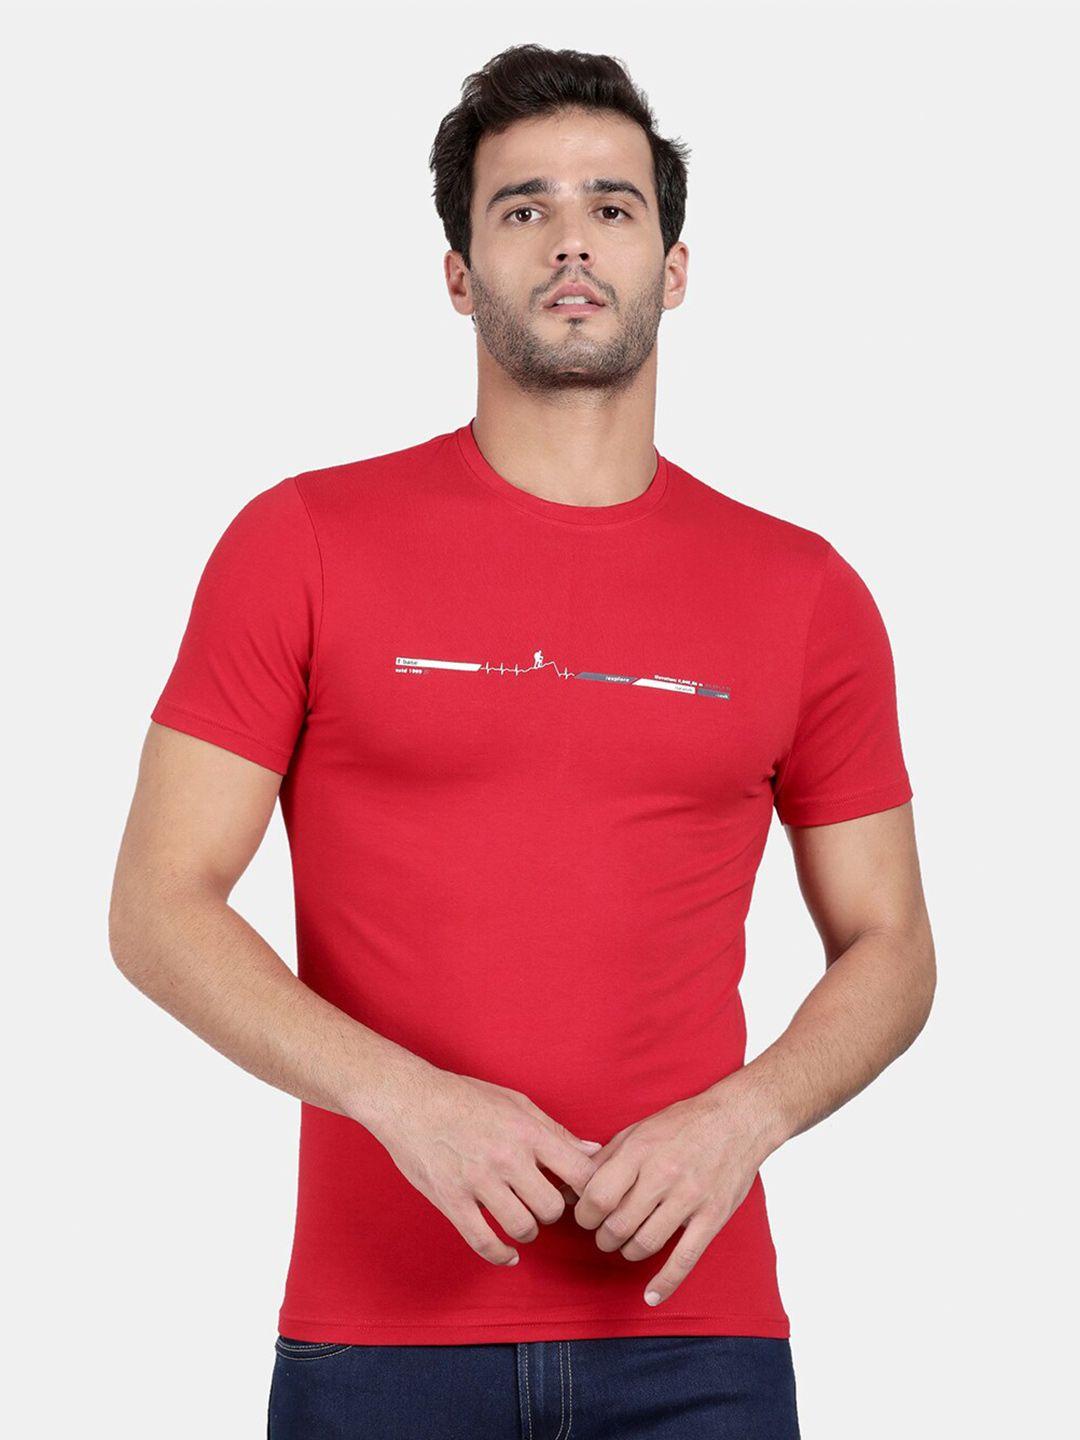 t-base-men-red-typography-printed-slim-fit-cotton-t-shirt